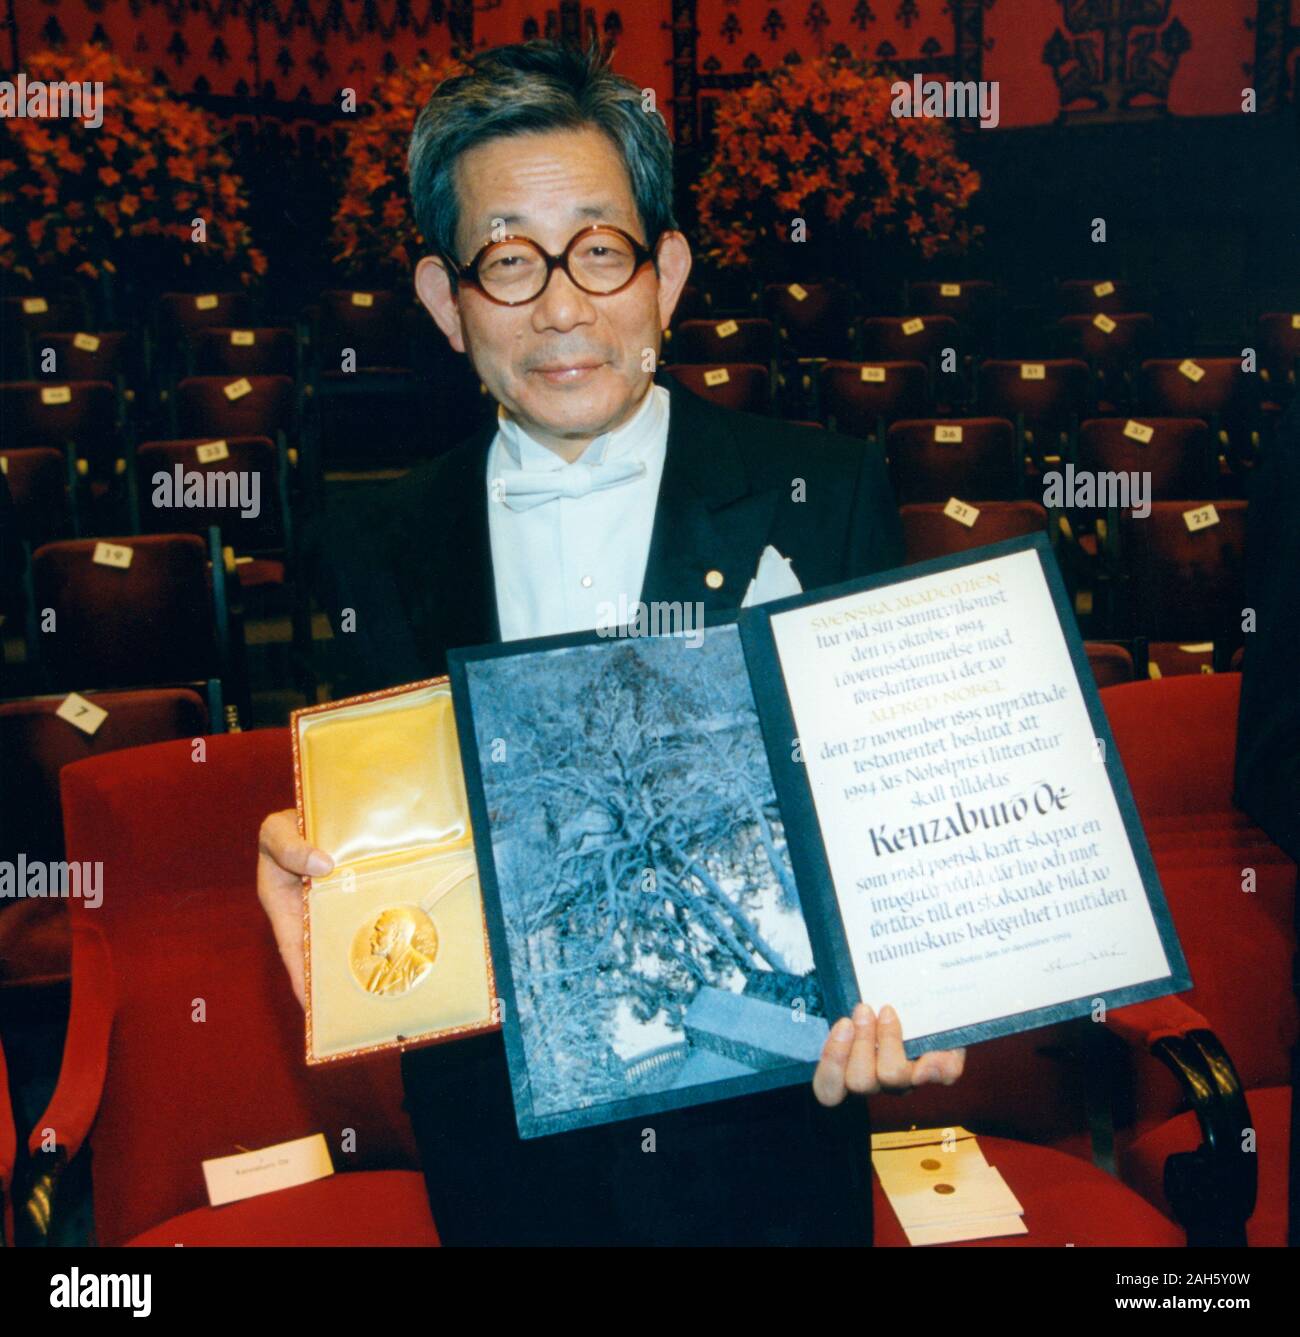 KENZABURO OE  Japanese author with his diploma after received the Nobel Prize in literature Stock Photo